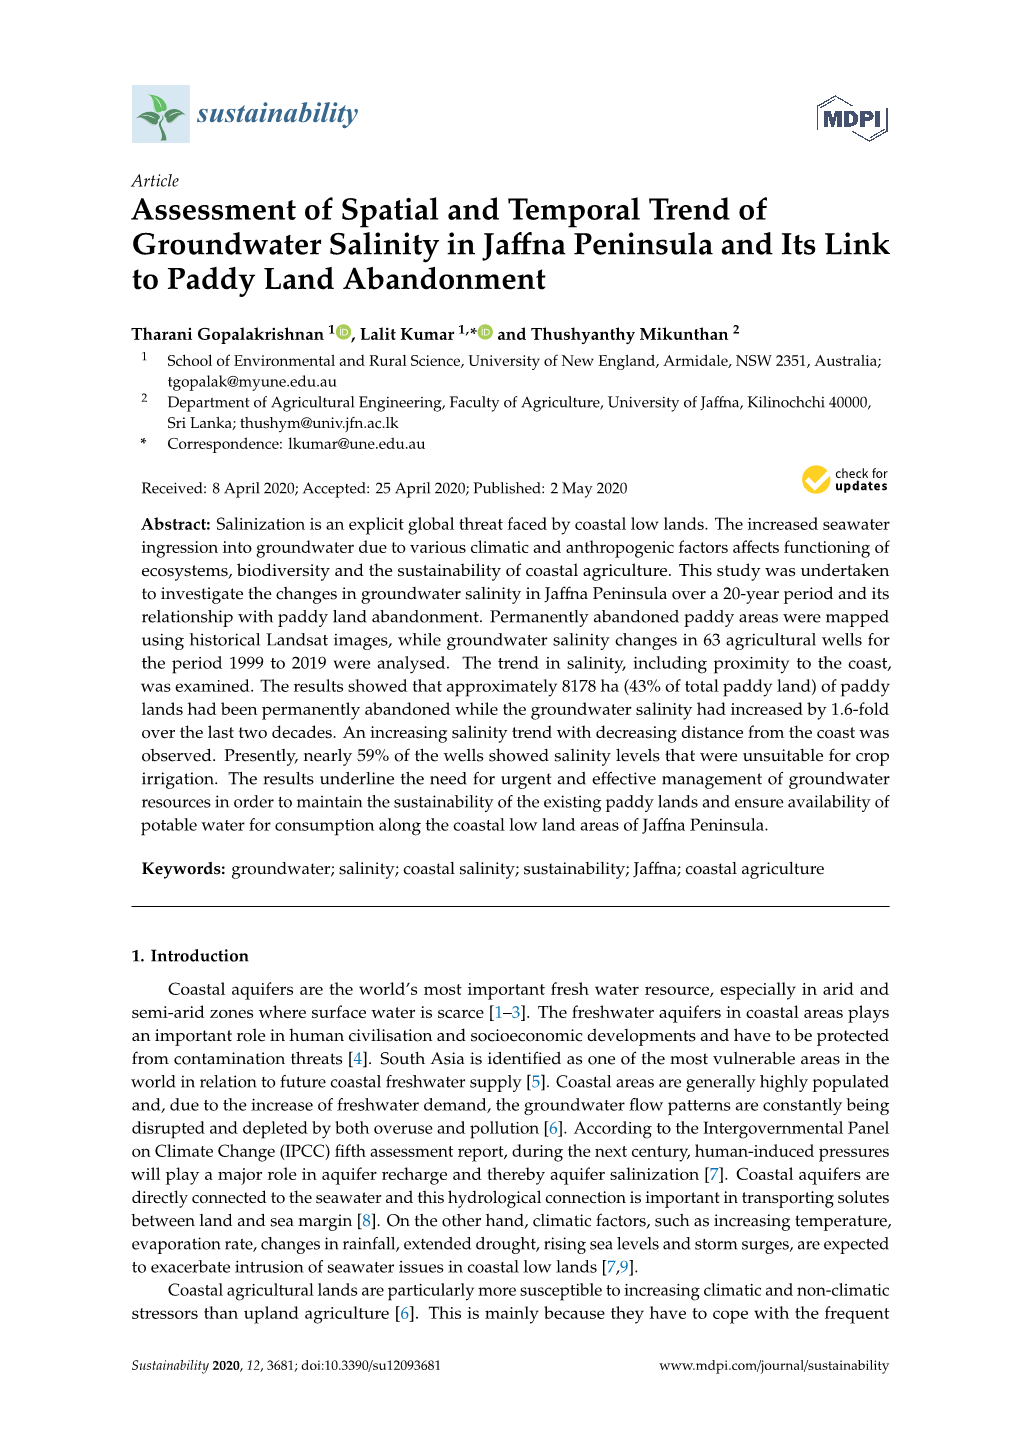 Assessment of Spatial and Temporal Trend of Groundwater Salinity in Jaﬀna Peninsula and Its Link to Paddy Land Abandonment